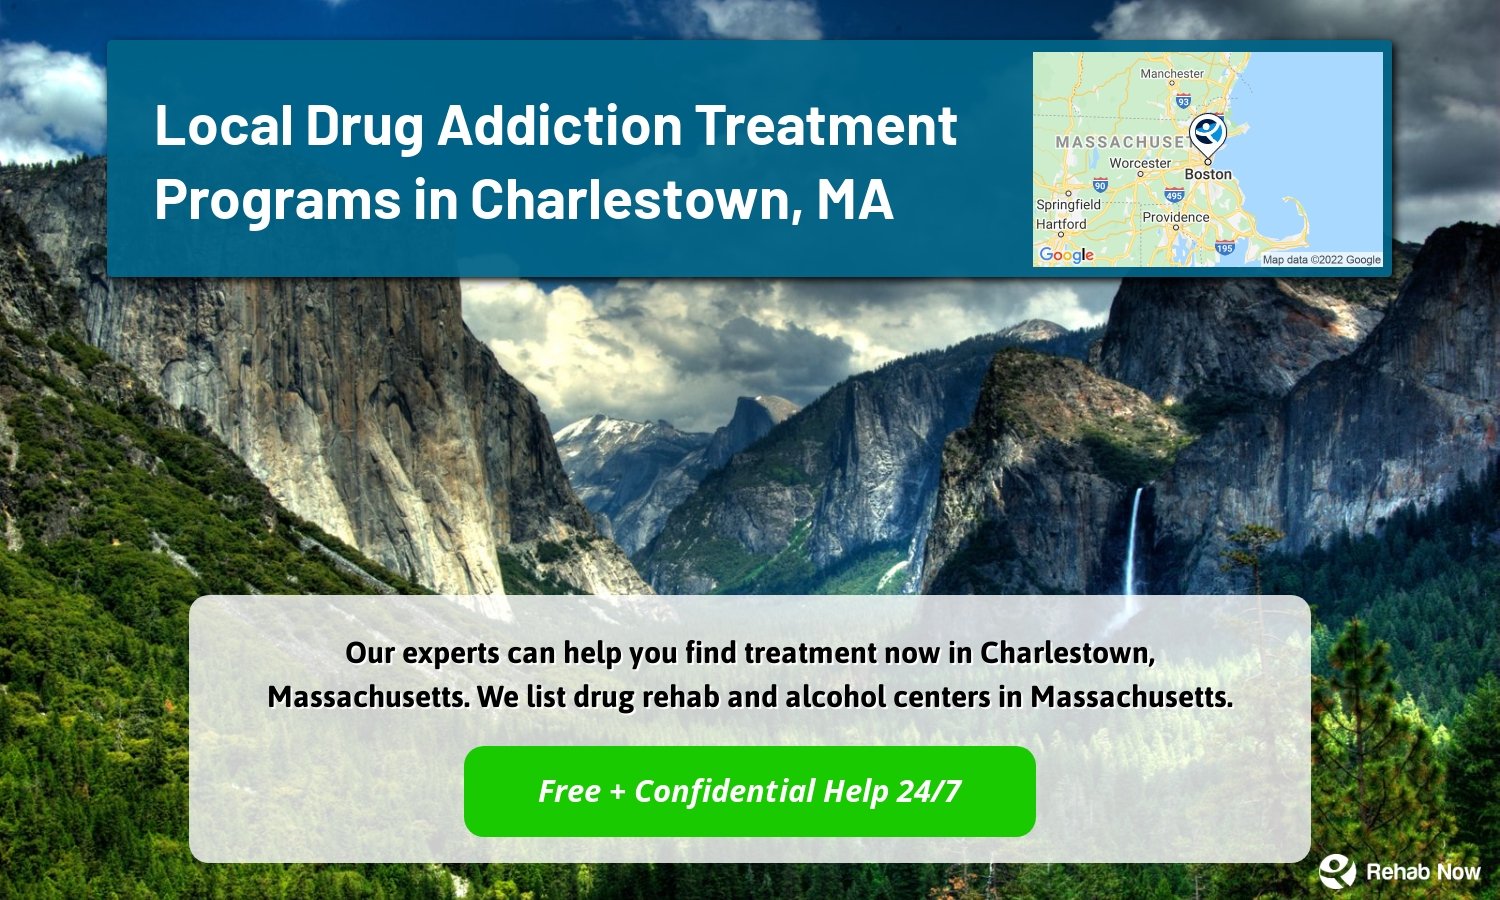 Our experts can help you find treatment now in Charlestown, Massachusetts. We list drug rehab and alcohol centers in Massachusetts.